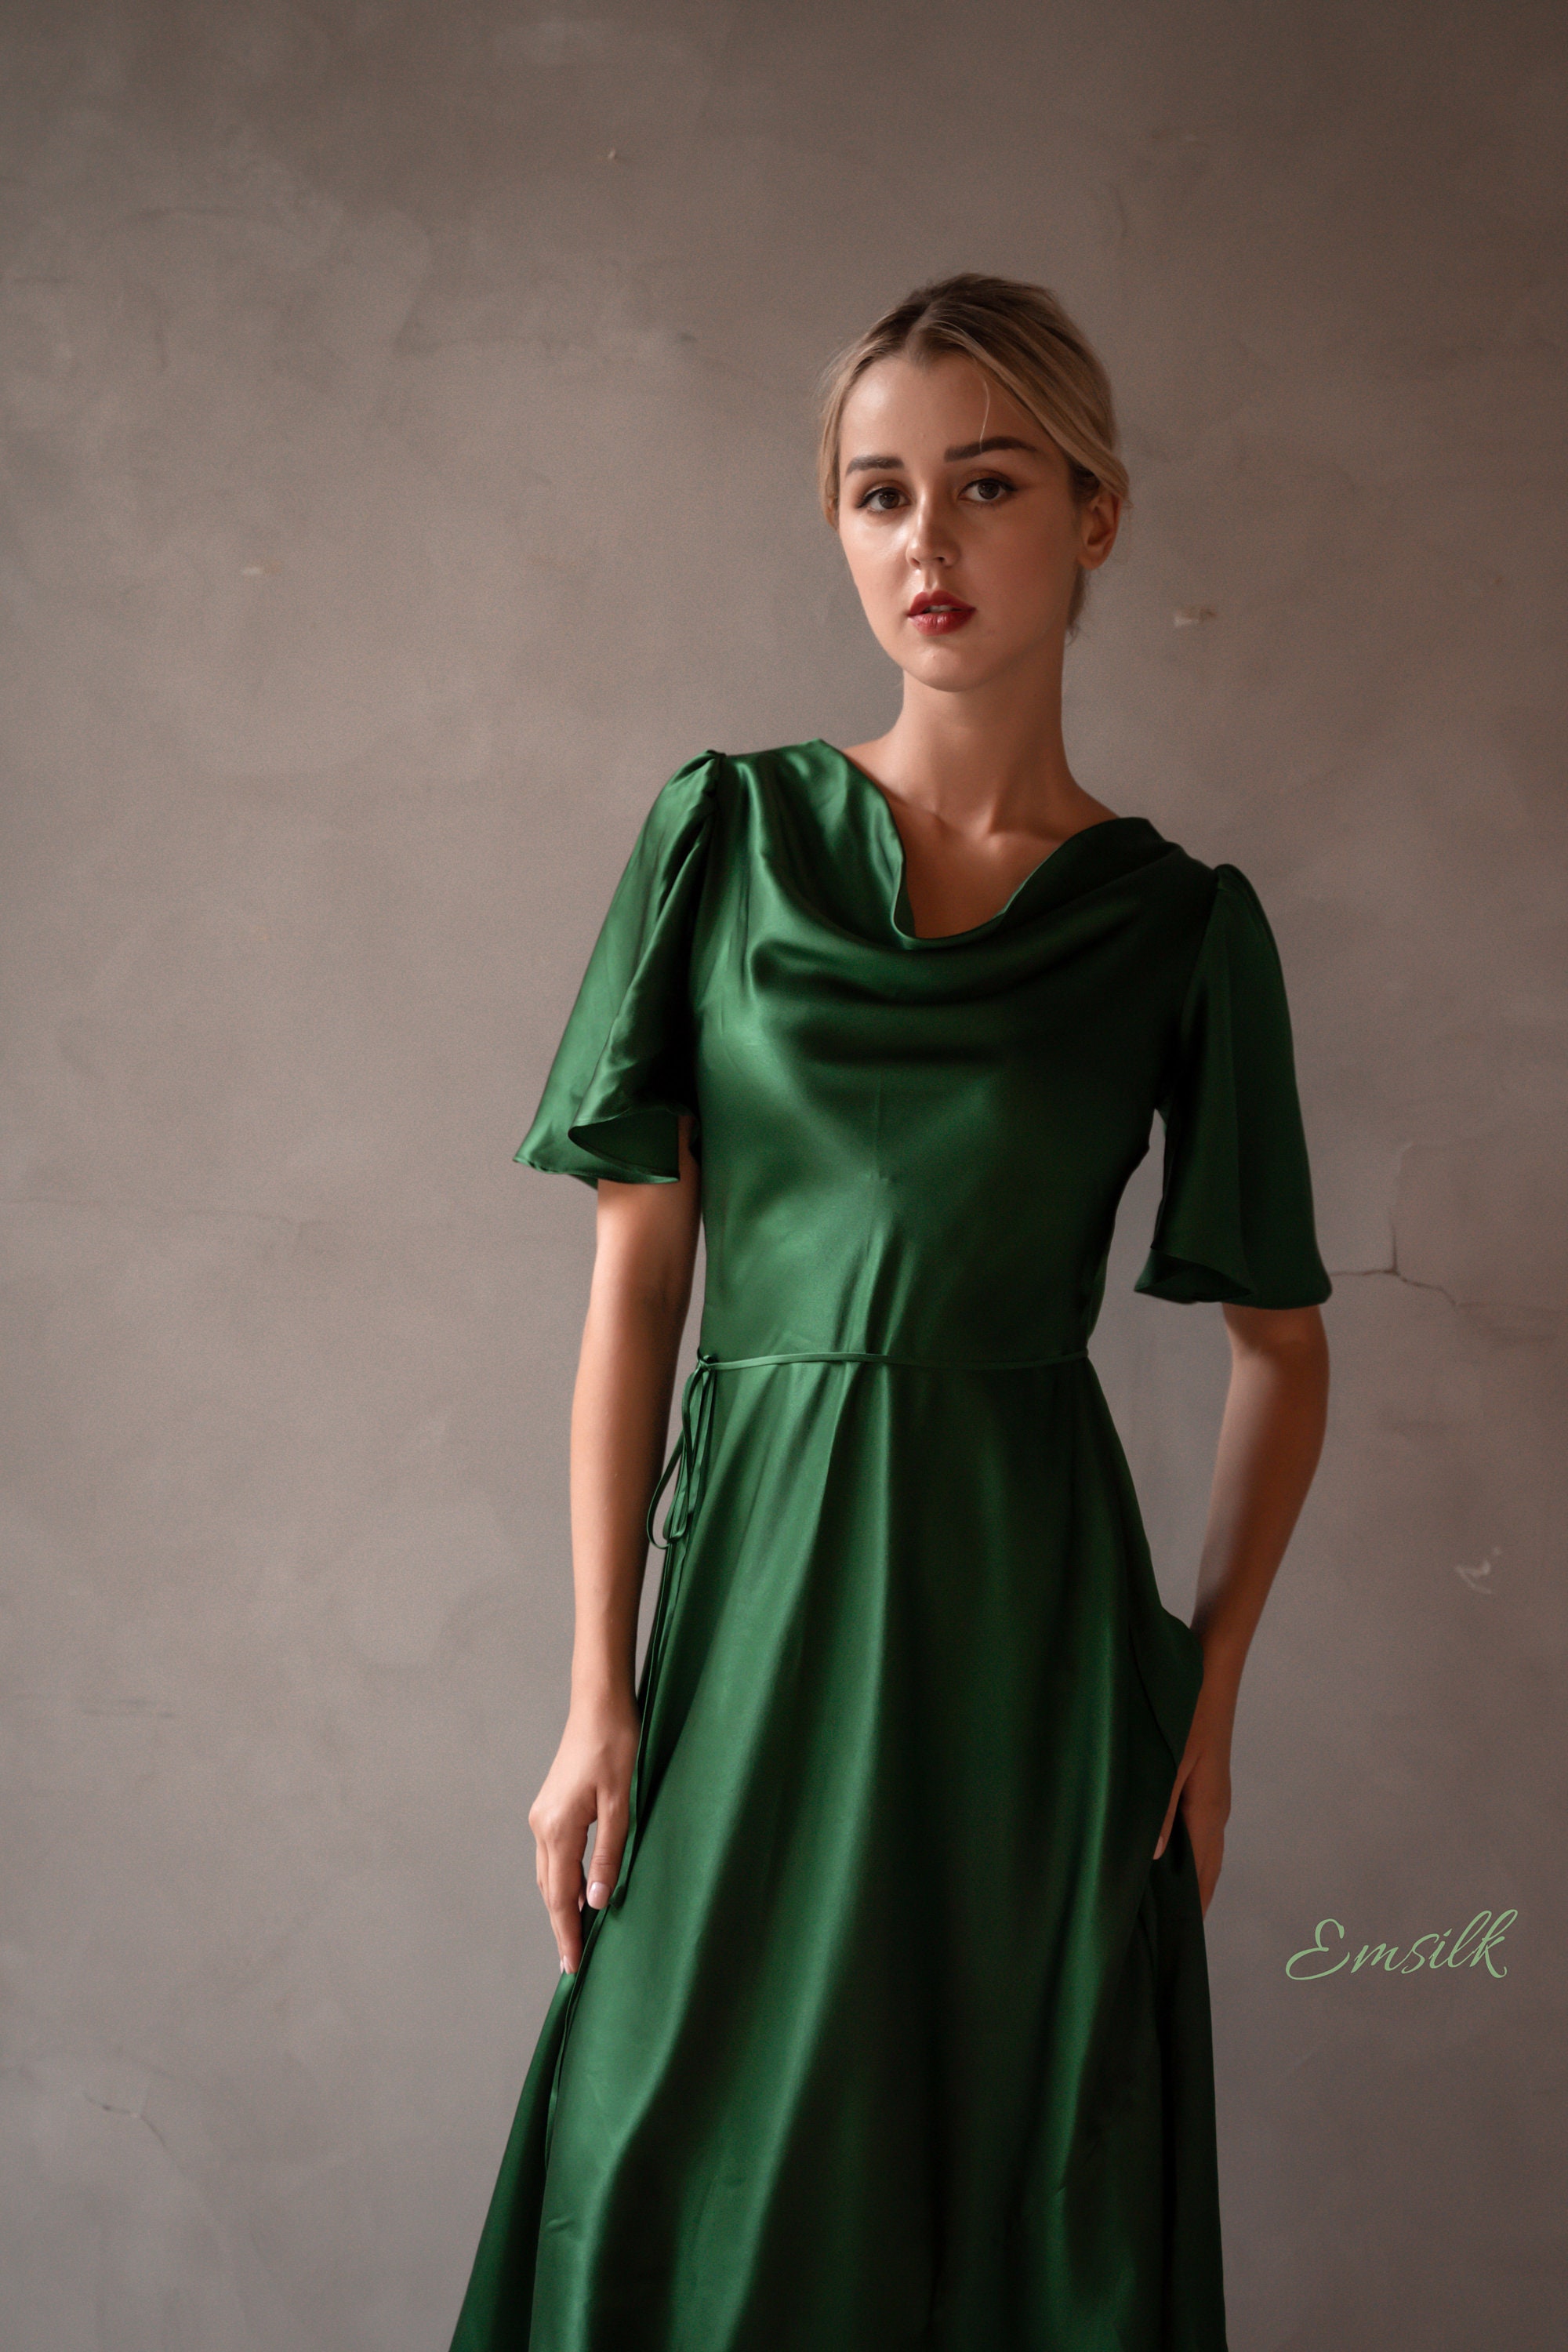 Rebellious Fashion satin cowl front ruched side mini dress in emerald green